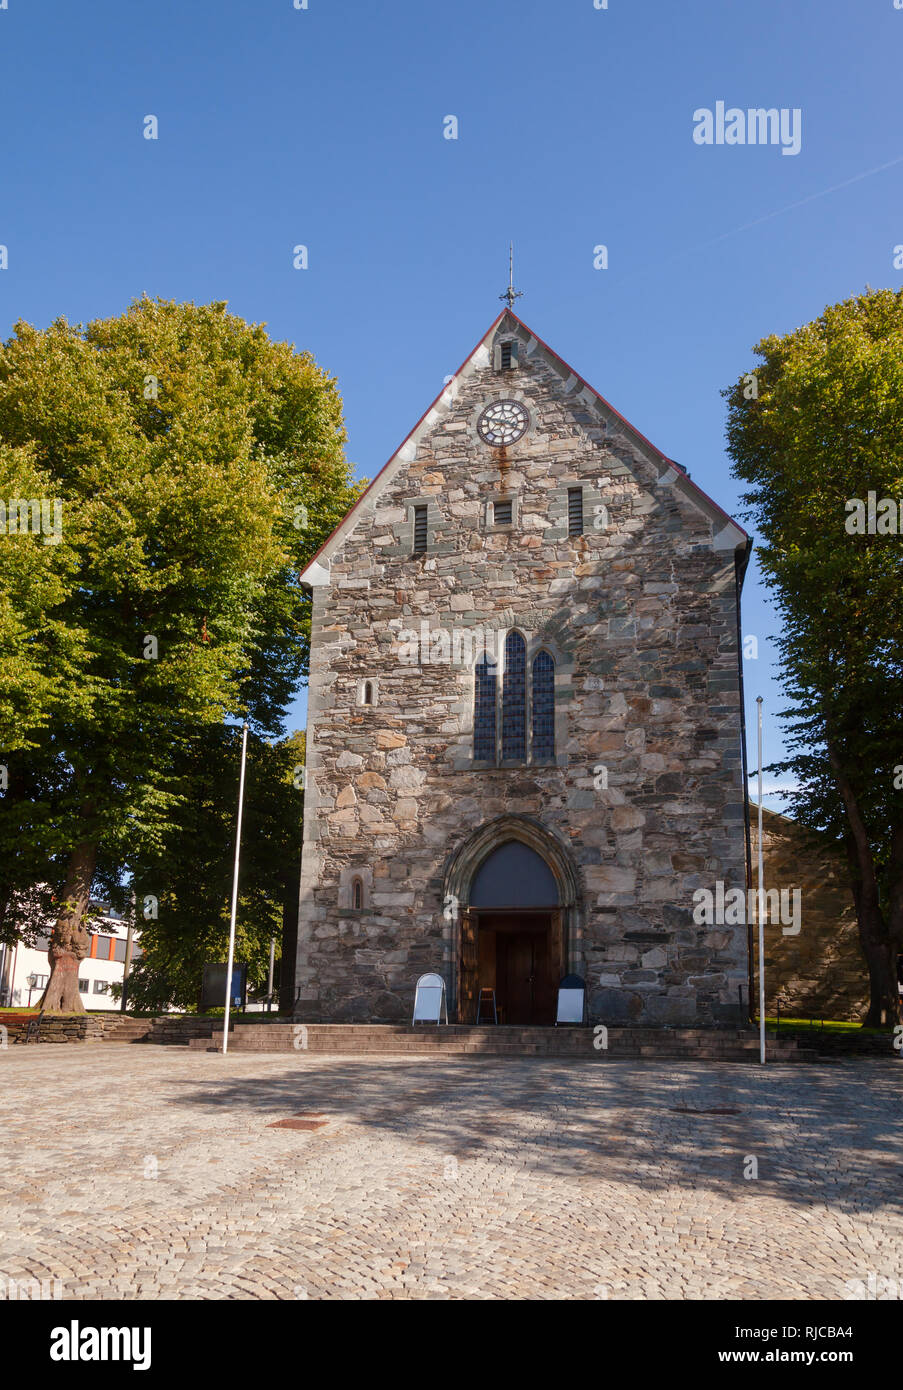 Front view of Stavanger Cathedral (Stavanger domkirke), the oldest norwegian cathedral and major landmark in Stavanger, Rogaland county, Norway, Scand Stock Photo